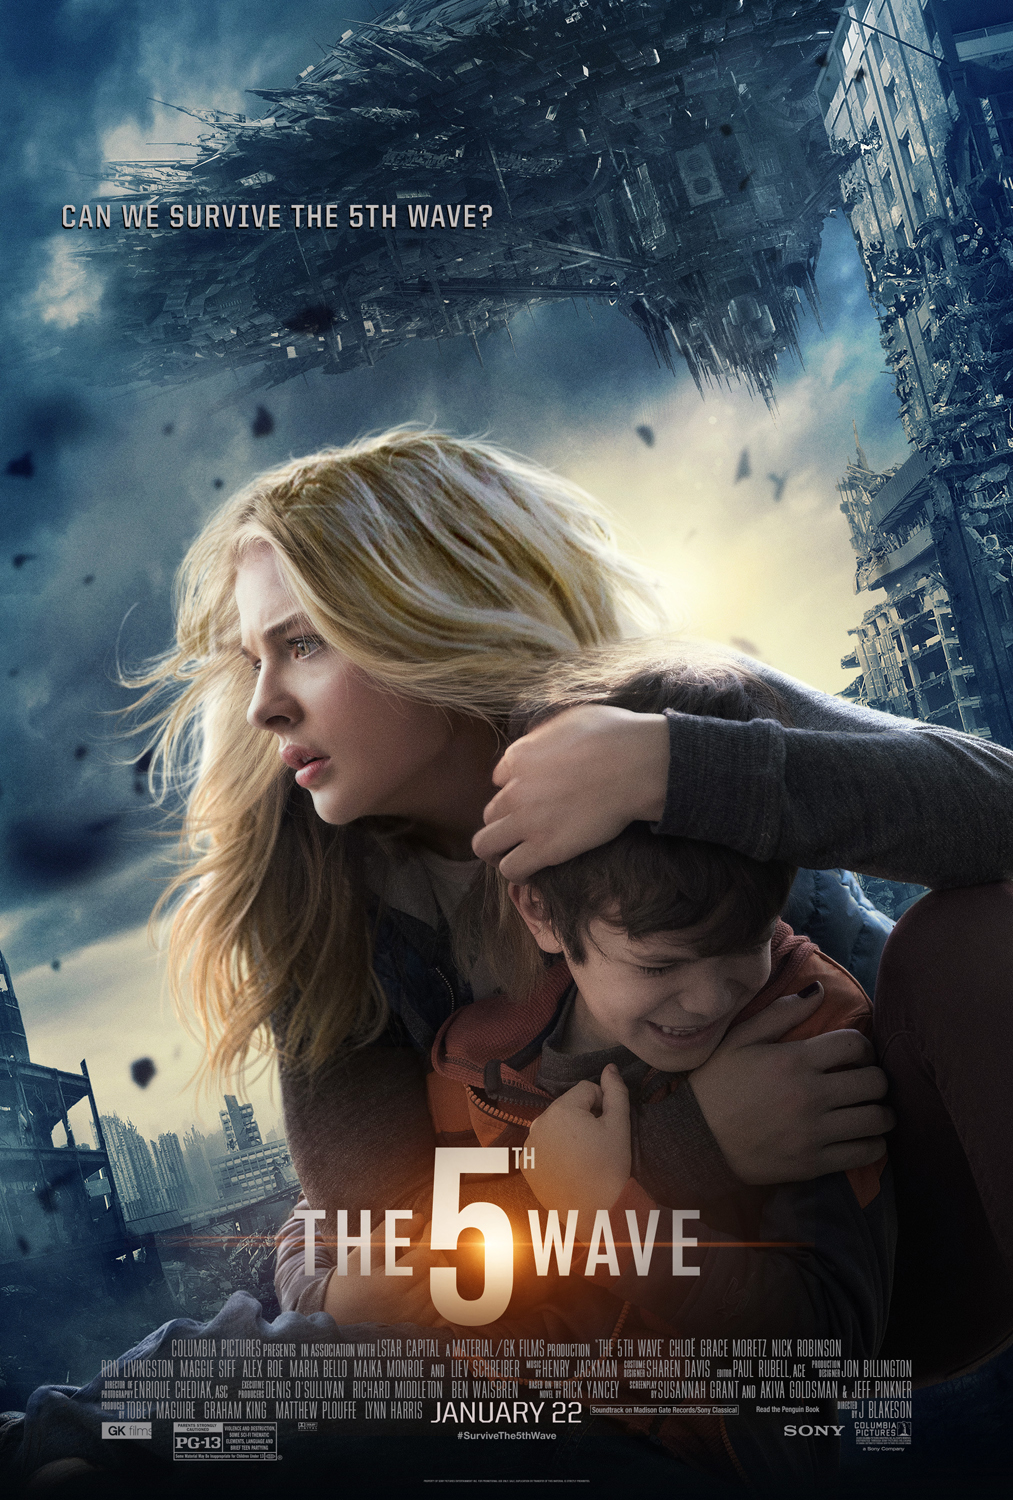 The 5th wave Mitchell the 5th wave evan book